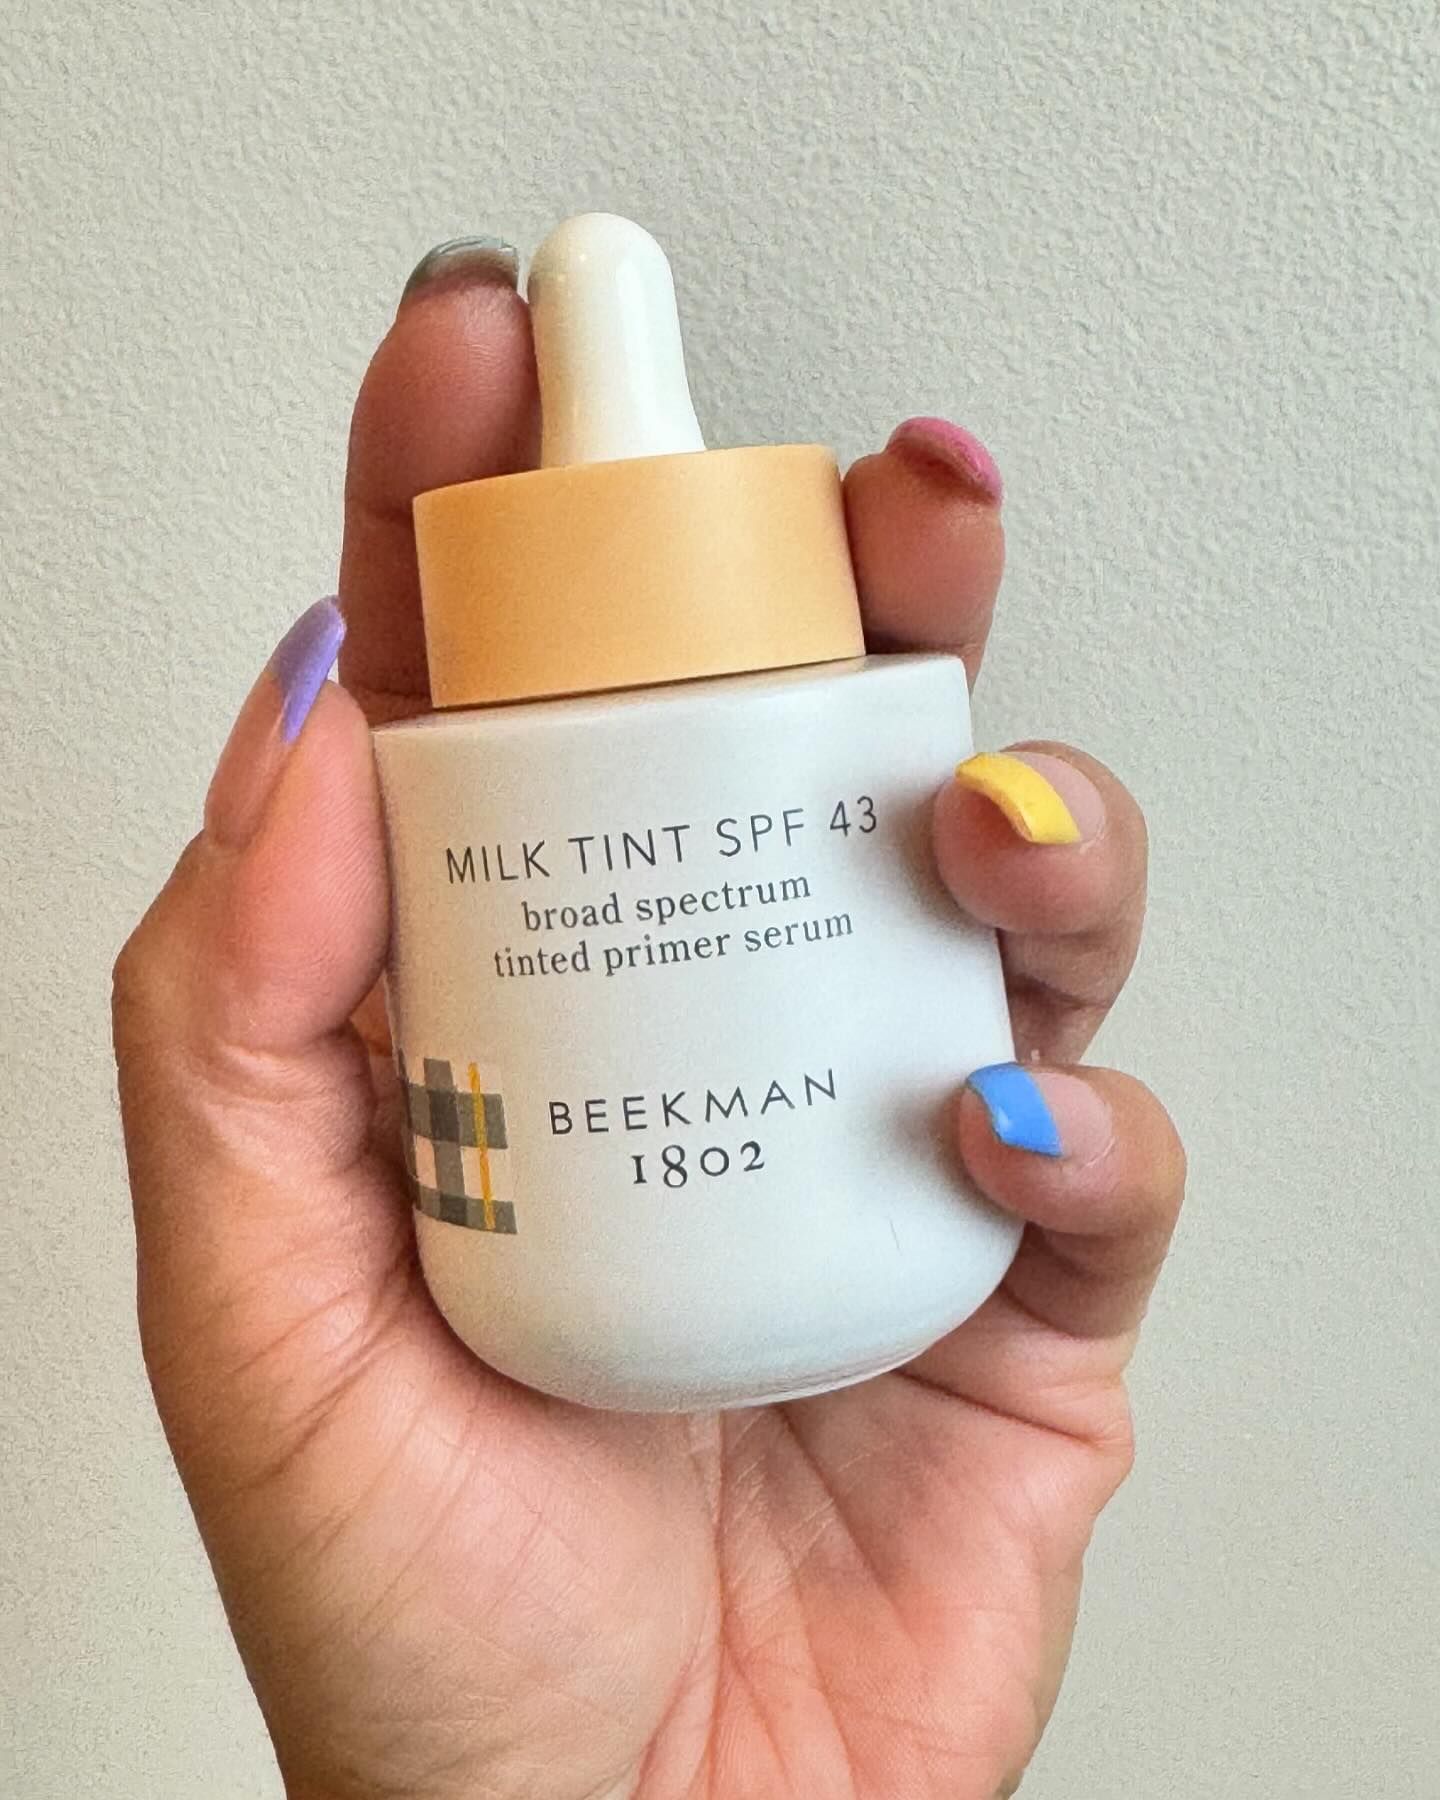 @beekman1802 does it again with another great product! This tinted serum is perfect for every day looks with & without foundation. Ever since I switched to the Beekman skincare line, my pores have minimized, smoother skin, less breakouts & just overall glowing. Bravo! 💛  #skin #skincareroutine #beautybloggers #fashionblogger #beekman1802 #takecareofyourself #travel #travelblogger